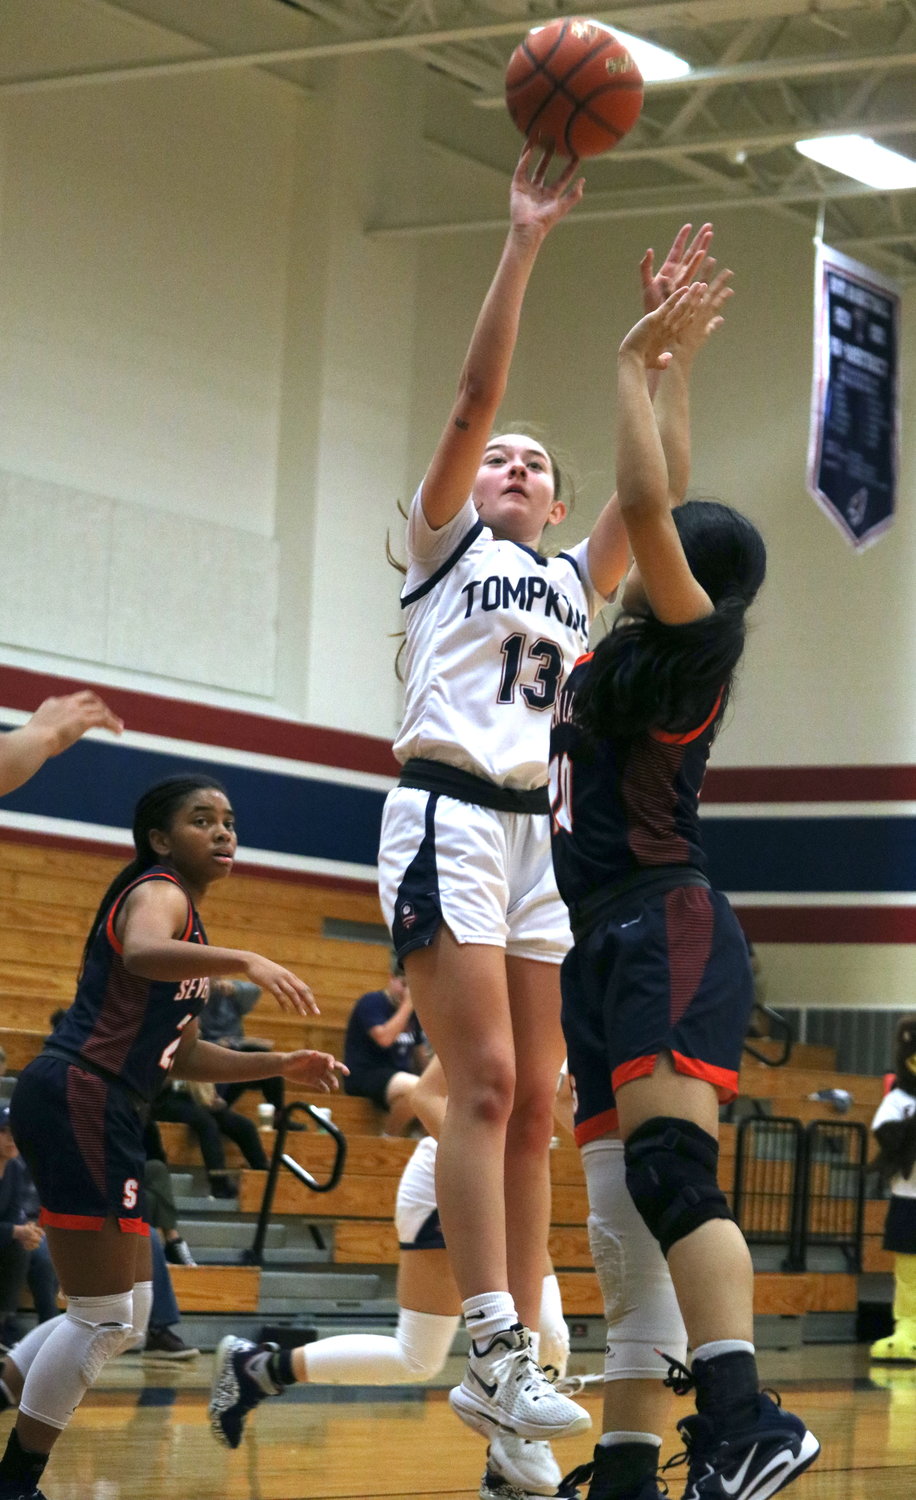 Macy Spencer shoots a fadeaway during Tuesday’s District 19-6A game between Tompkins and Seven Lakes at the Tompkins gym.